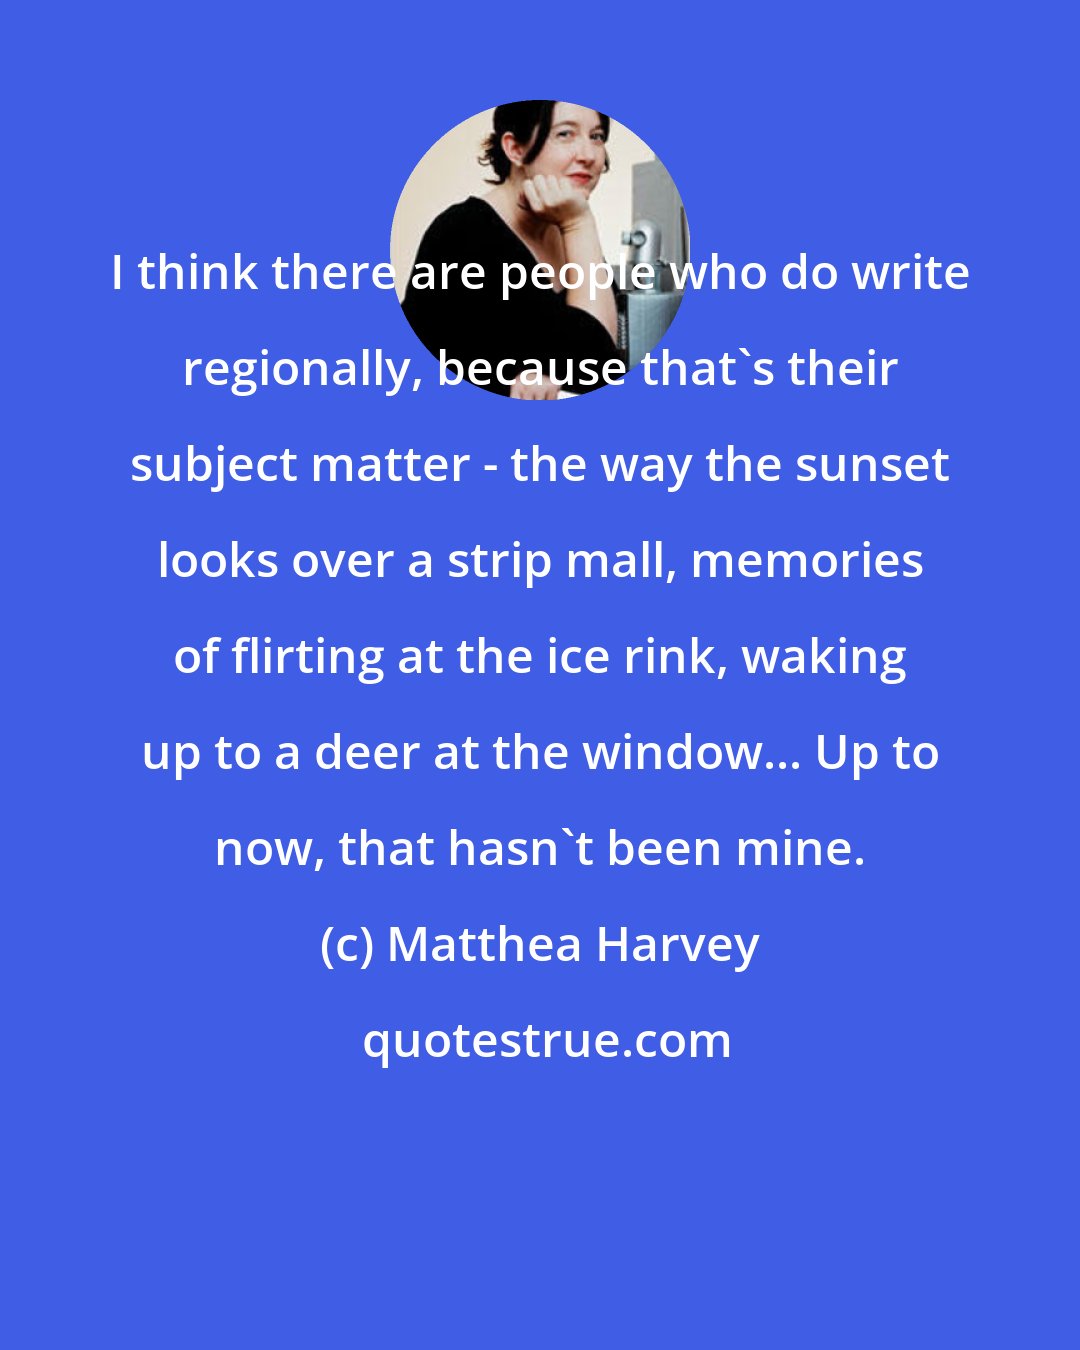 Matthea Harvey: I think there are people who do write regionally, because that's their subject matter - the way the sunset looks over a strip mall, memories of flirting at the ice rink, waking up to a deer at the window... Up to now, that hasn't been mine.